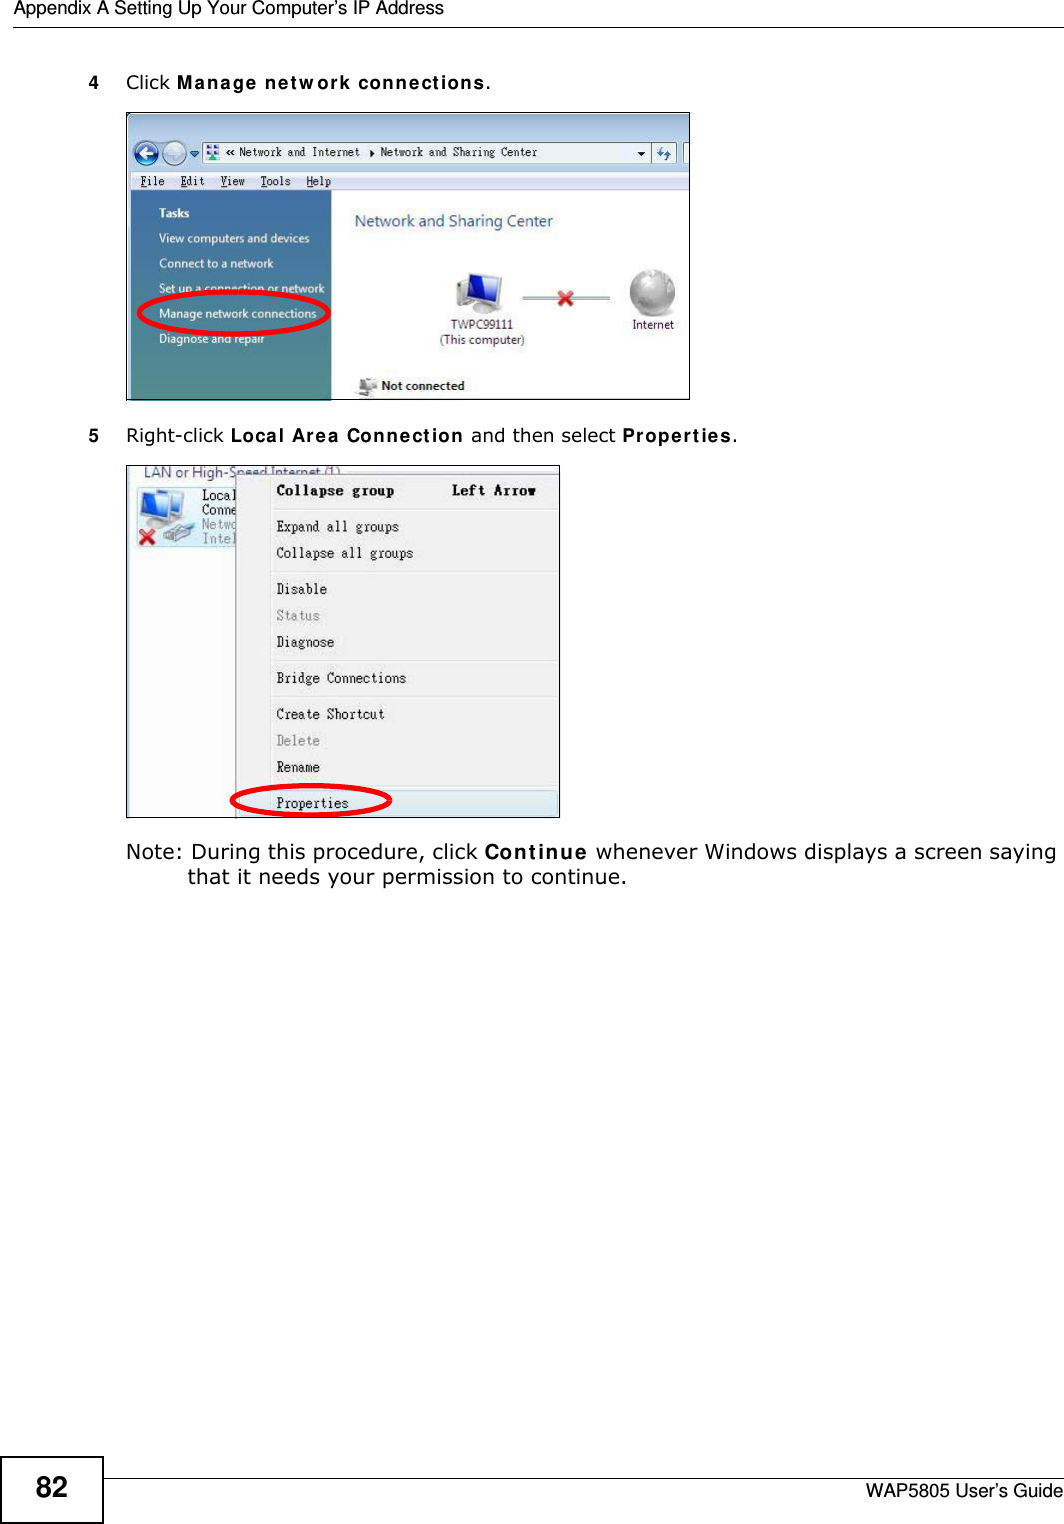 Appendix A Setting Up Your Computer’s IP AddressWAP5805 User’s Guide824Click Manage network connections.5Right-click Local Area Connection and then select Properties.Note: During this procedure, click Continue whenever Windows displays a screen saying that it needs your permission to continue.